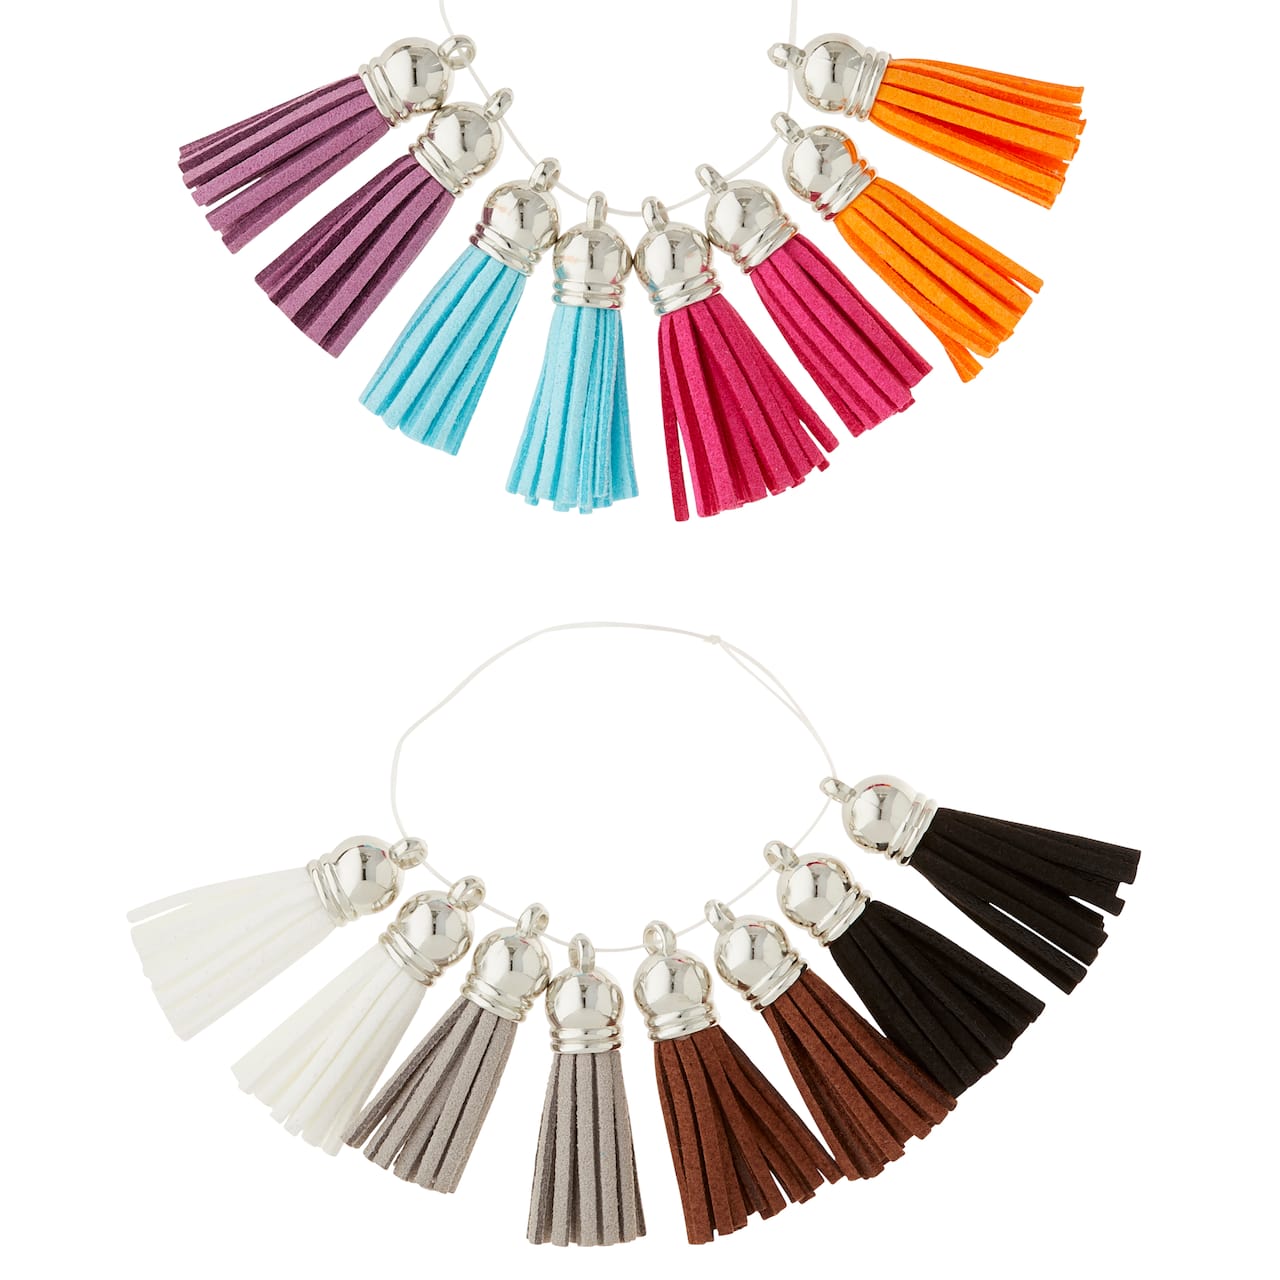 Mixed Suede Tassels by Bead Landing&#x2122;